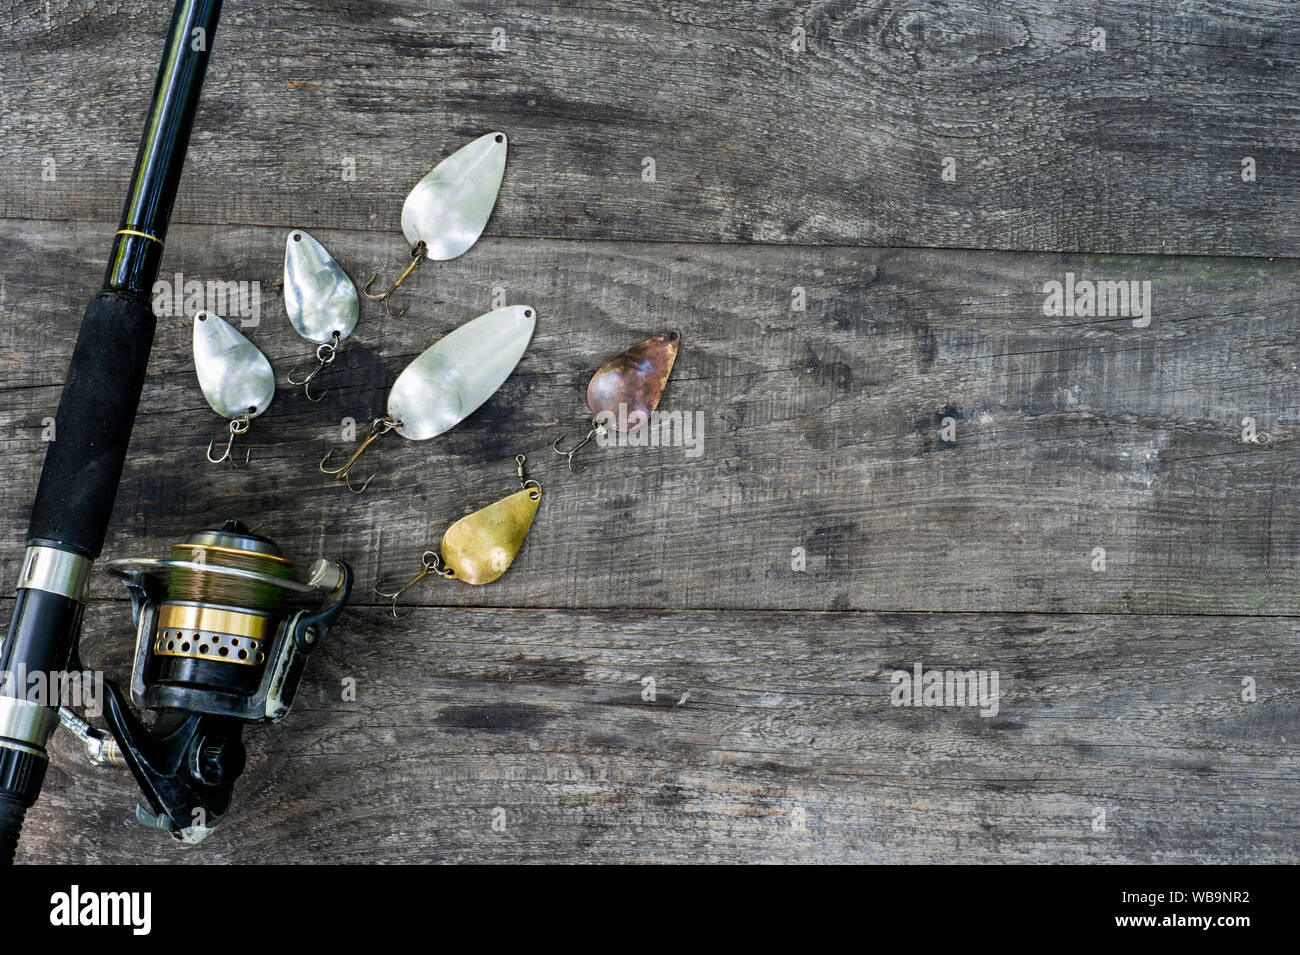 Trolling spoons for salmon Stock Photo - Alamy